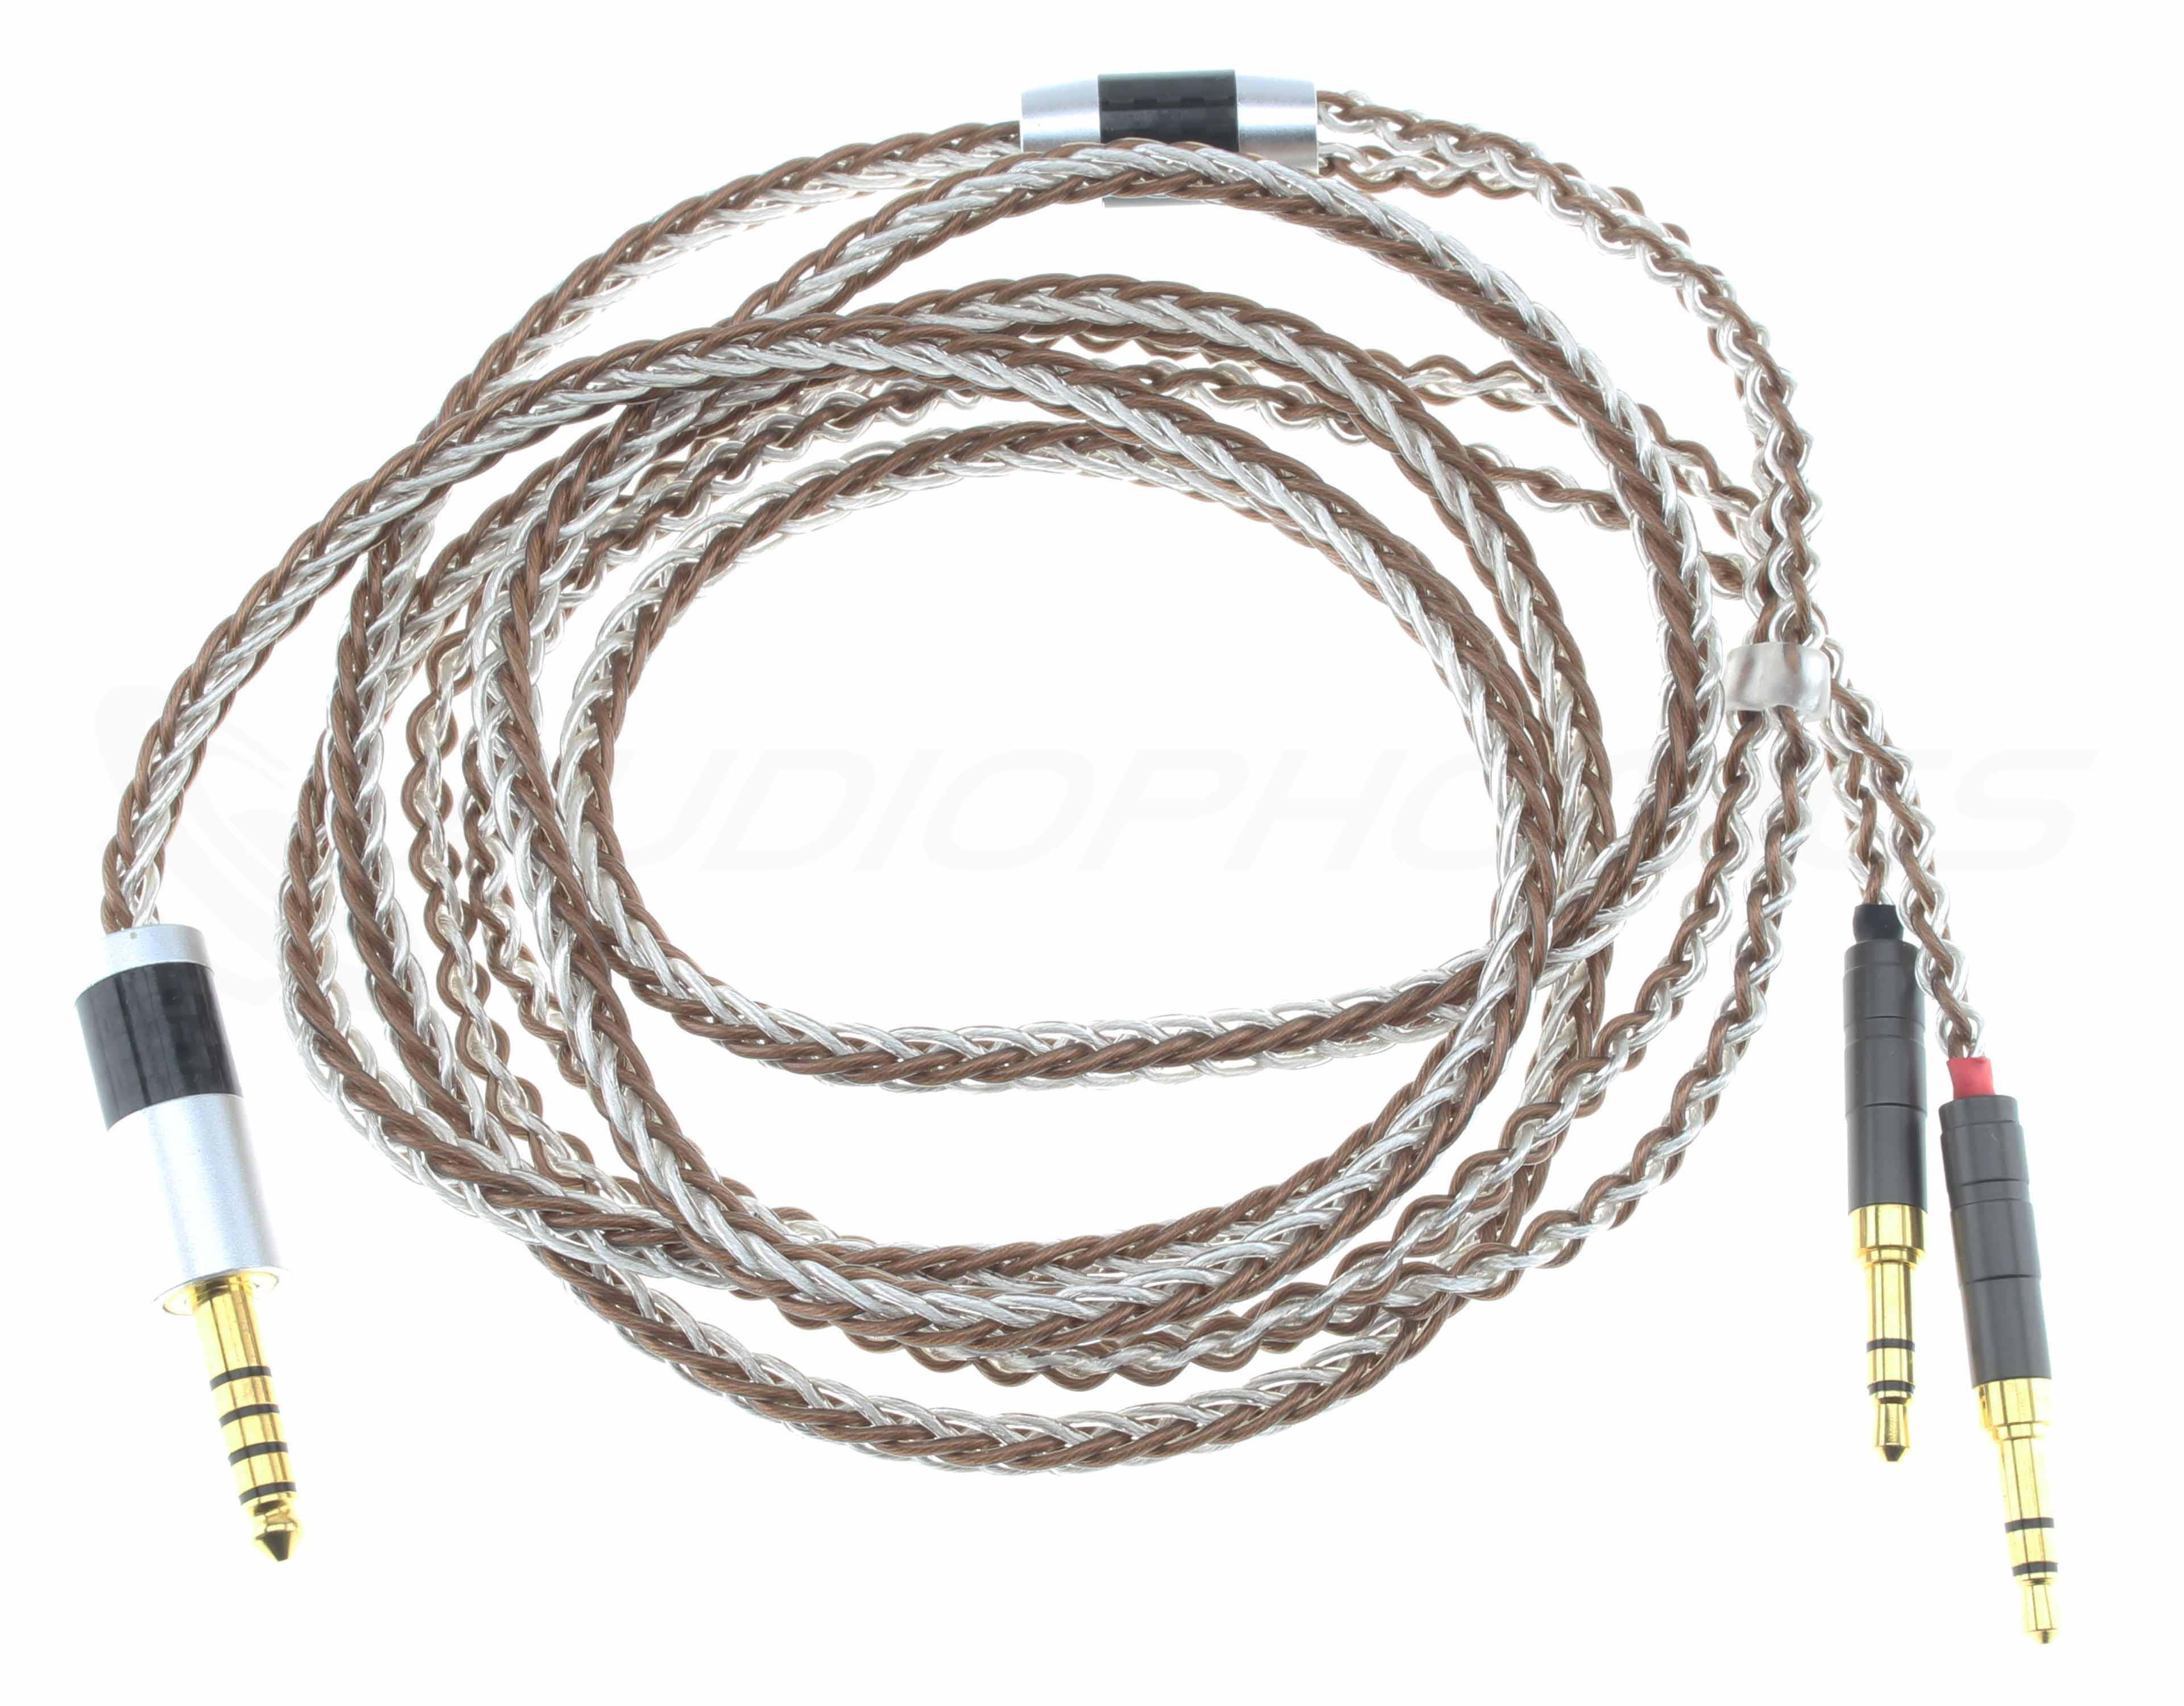 Headphone Balanced Cable Jack 4.4mm to 2x Jack 3.5mm OCC Copper Silver Plated 1.5m